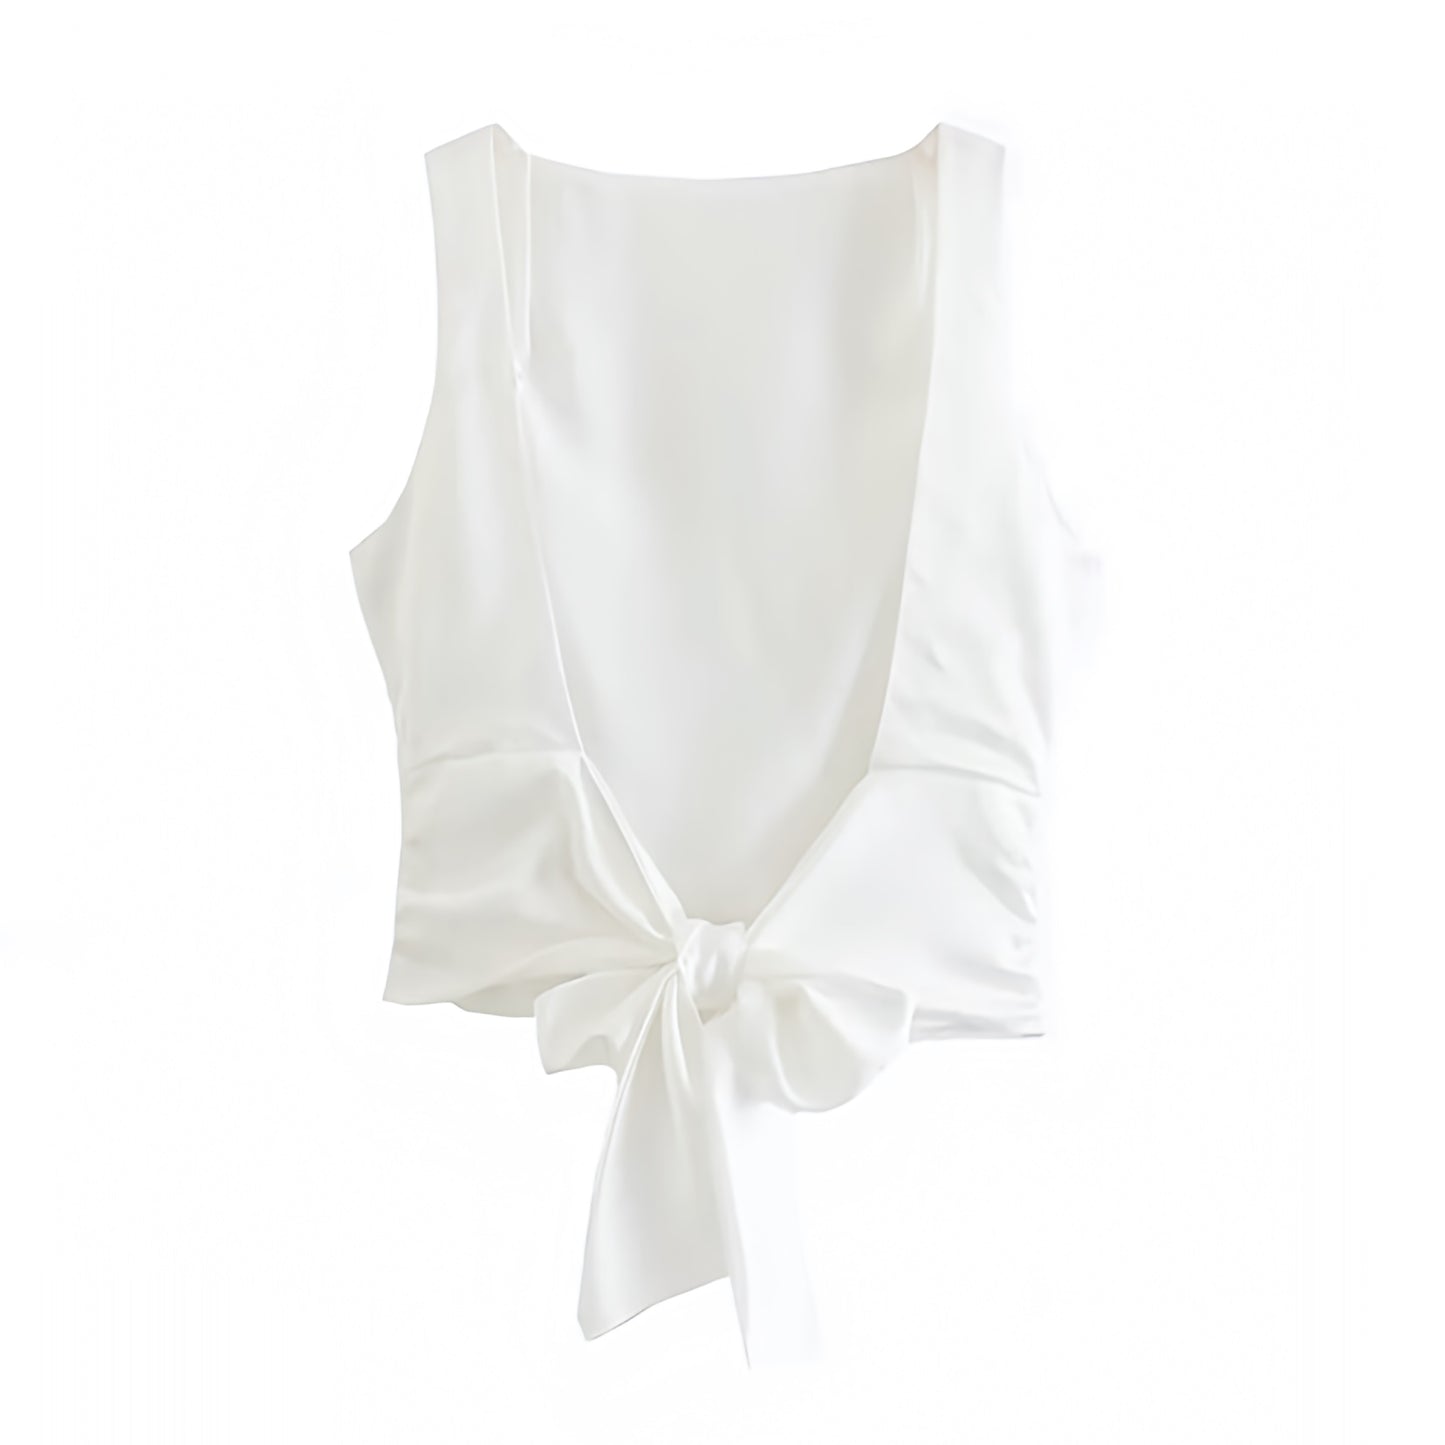 ivory-cream-off-white-satin-silk-metallic-slim-fit-ruched-draped-bodycon-boatneck-sleeveless-short-sleeve-backless-open-back-bow-string-tie-full-length-hip-camisole-crop-tank-top-blouse-shirt-women-ladies-teens-tweens-chic-trendy-spring-2024-summer-elegant-casual-semi-formal-feminine-classy-cocktail-party-club-wear-sexy-date-night-out-evening-90s-minimalist-minimalism-office-siren-stockholm-style-tops-zara-revolve-aritzia-mango-reformation-whitefox-edikted-princess-polly-dupe